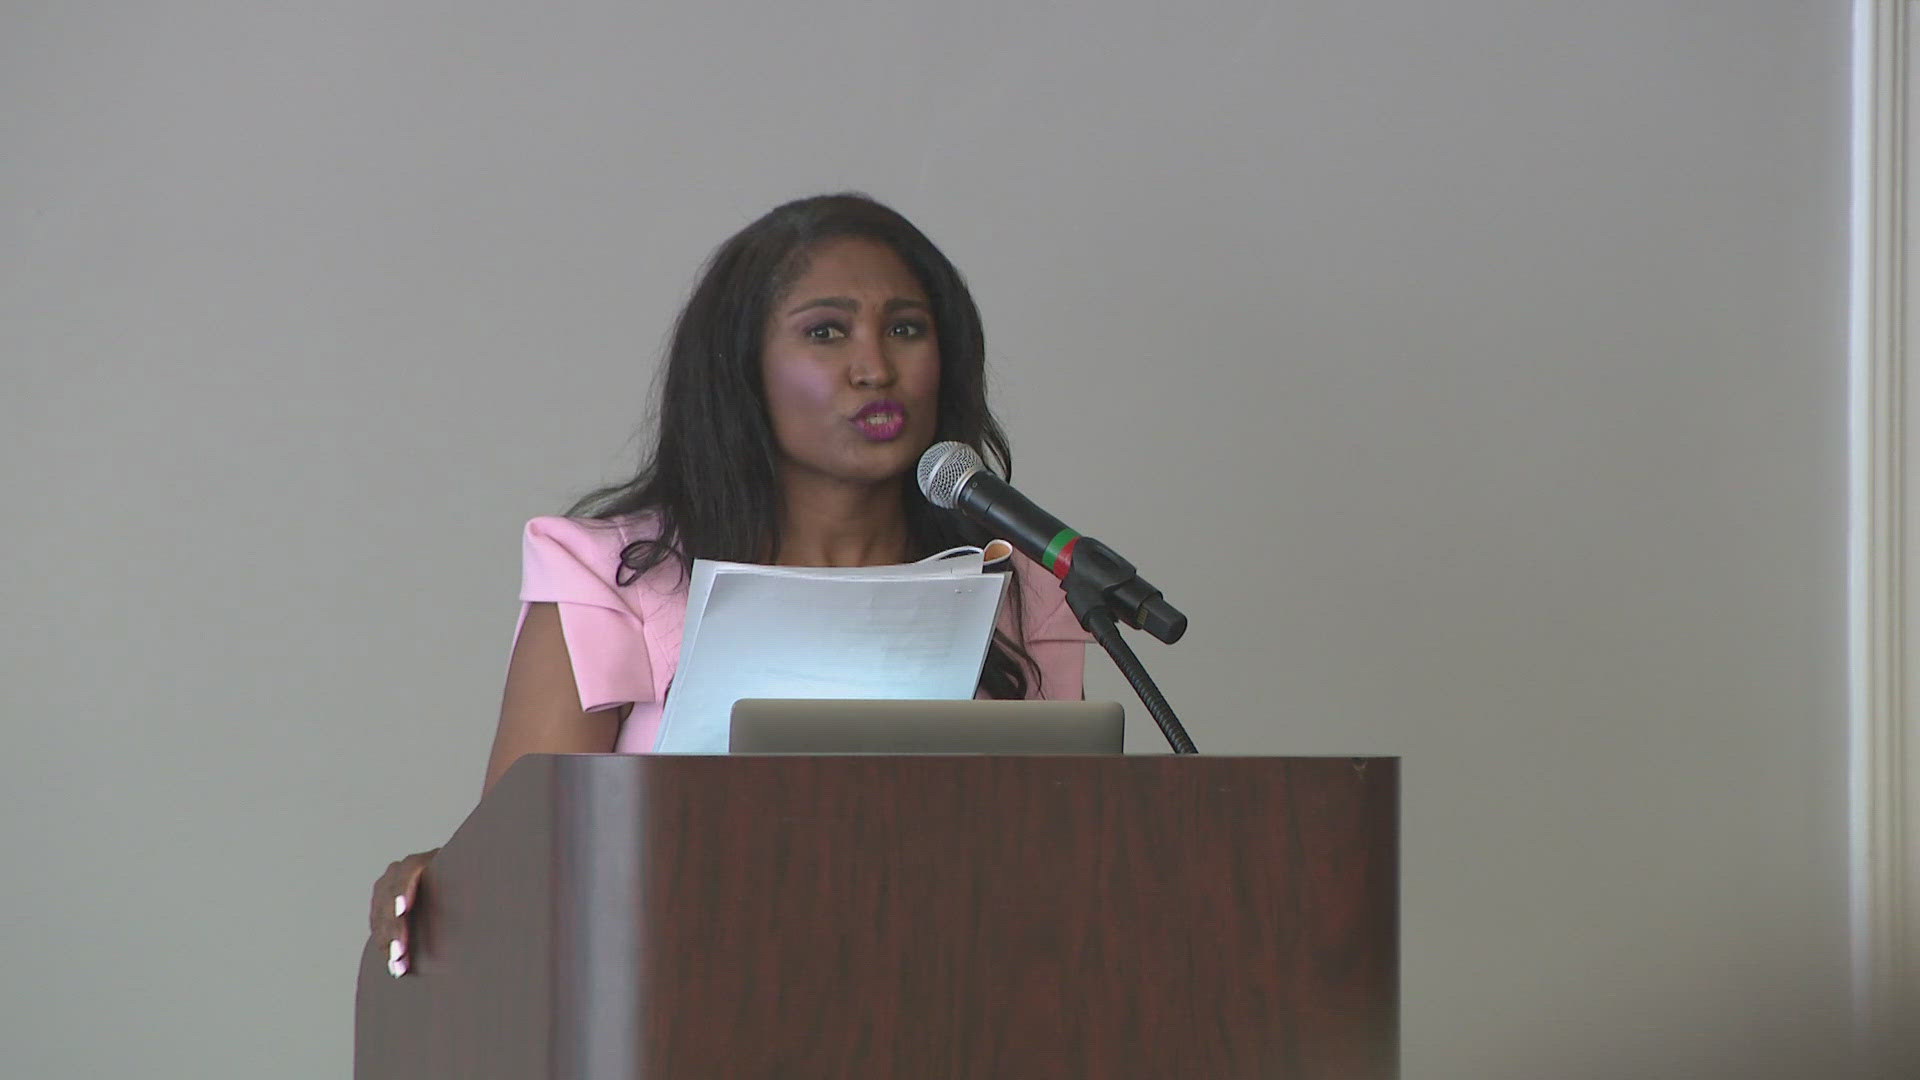 OUR MIRI MARSHALL SERVED AS EMCEE FOR THE WOMEN OF PRINCE GEORGE'S COUNTY'S -- 14th ANNUAL WOMEN'S CONFERENCE.